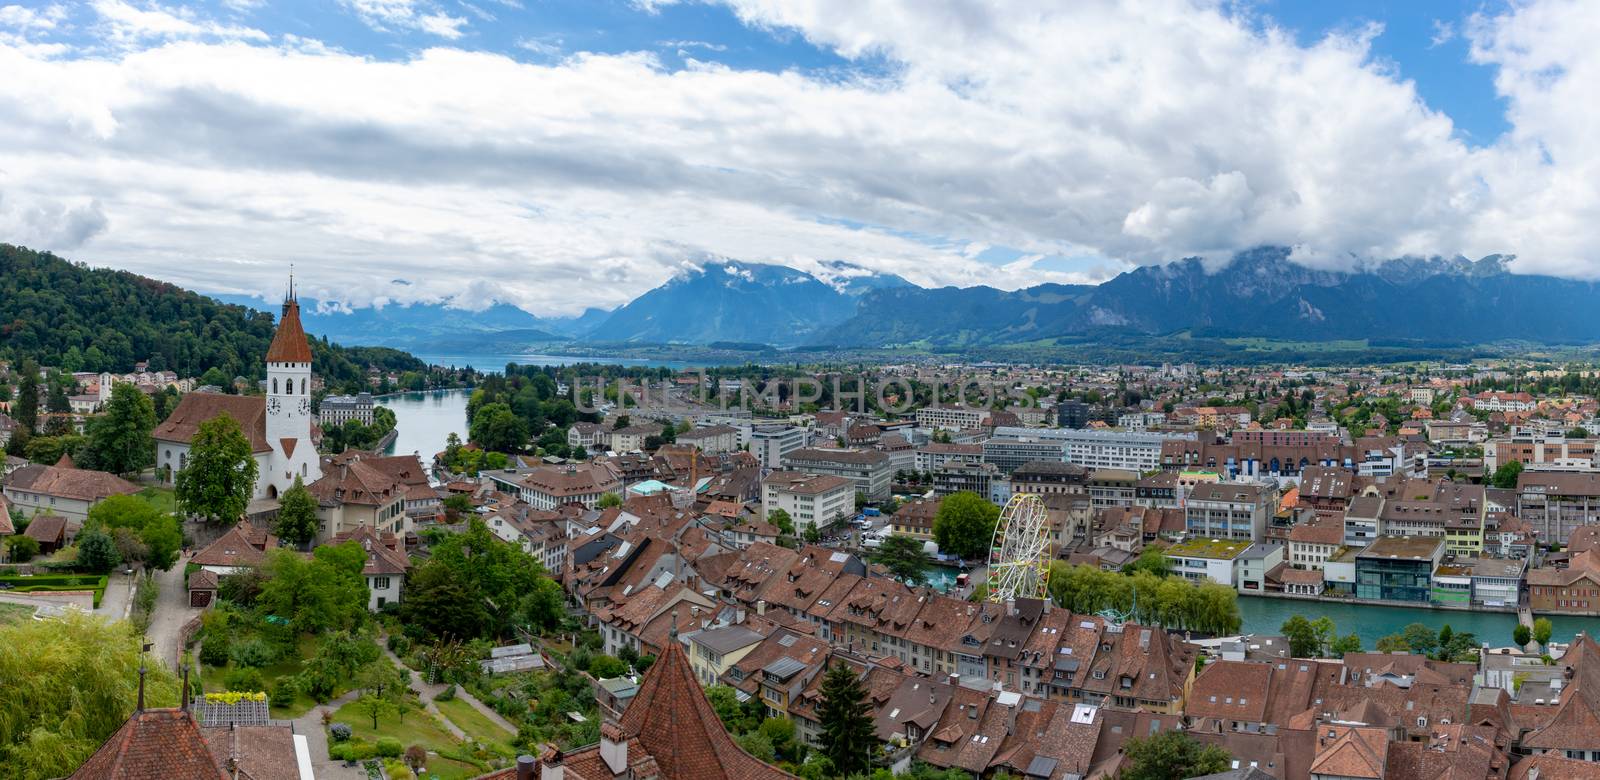 Panorama of Thun, Switzerland viewing Castles, Lakes, and the To by kingmaphotos